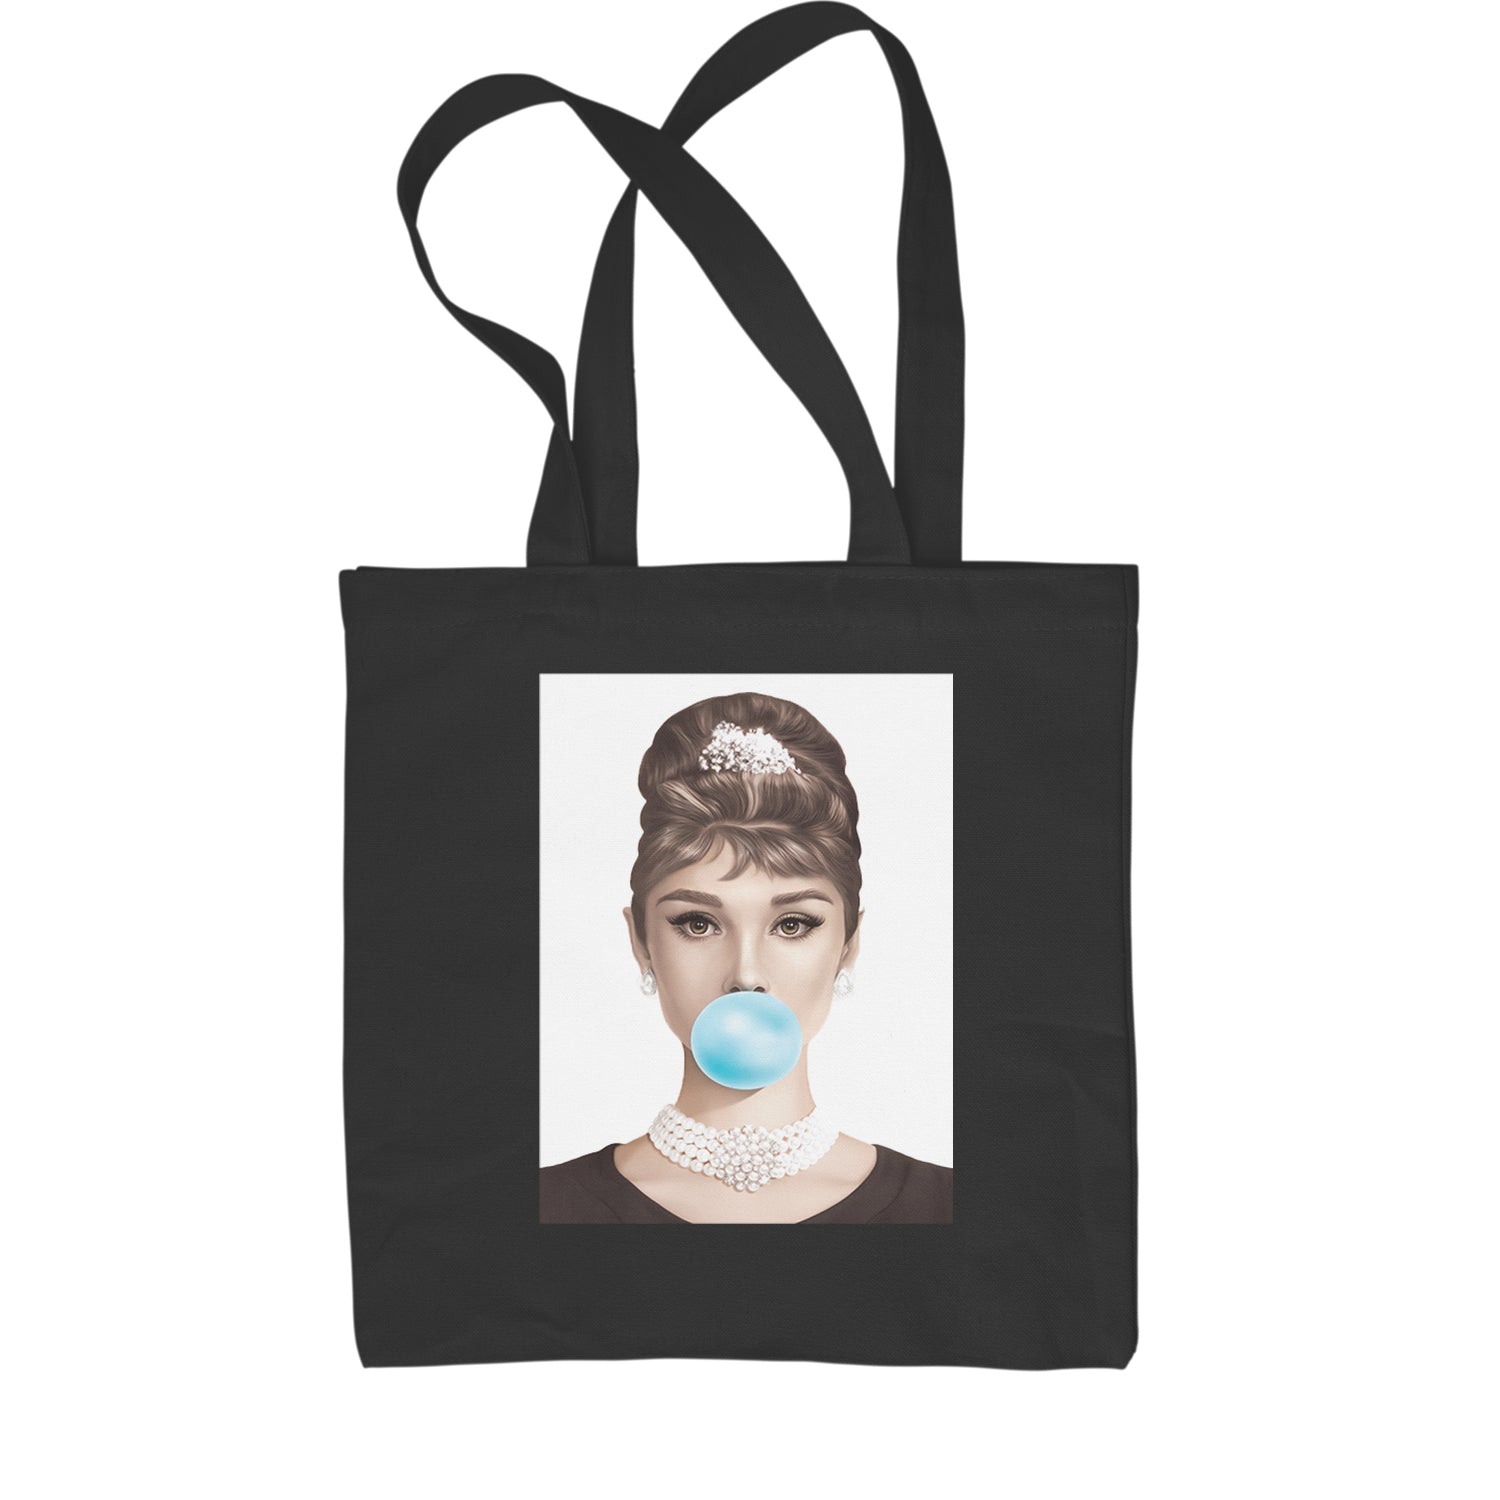 Audrey Hepburn Chewing Bubble Gum American Icon Shopping Tote Bag